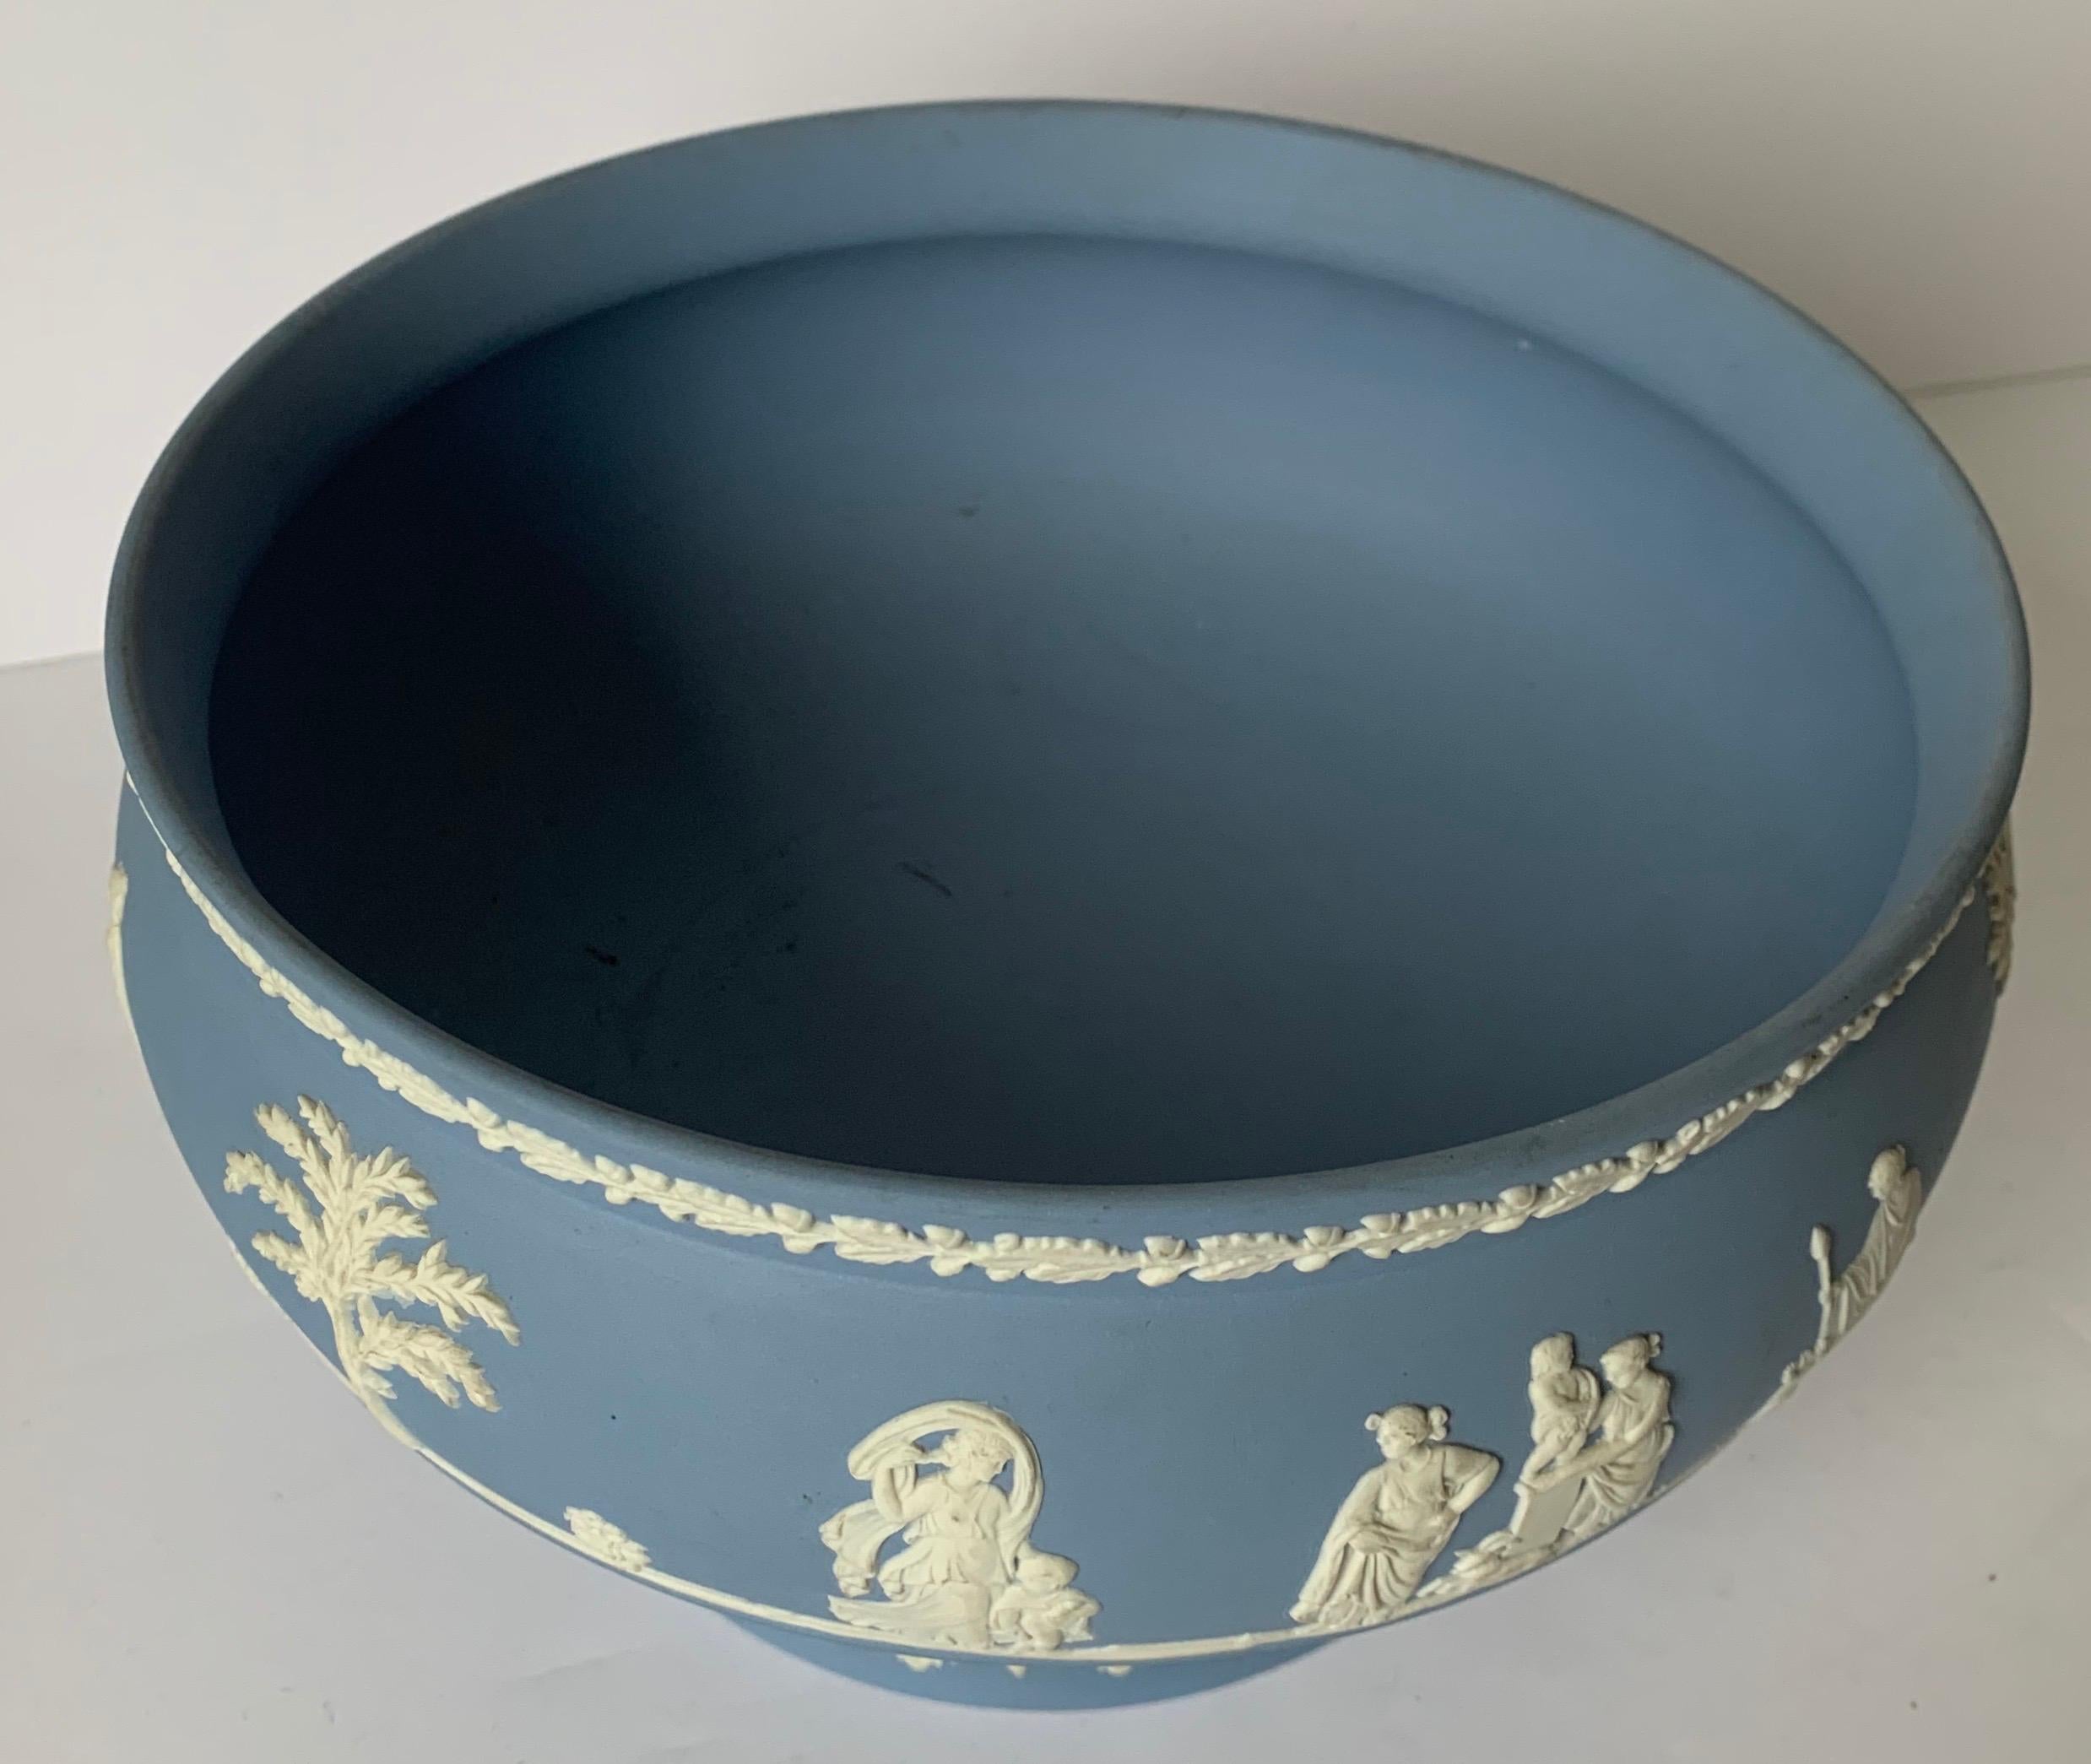 1970 Wedgwood jasperware footed bowl. Light blue jasperware with all-over white neoclassical motif. Signed on the underside.